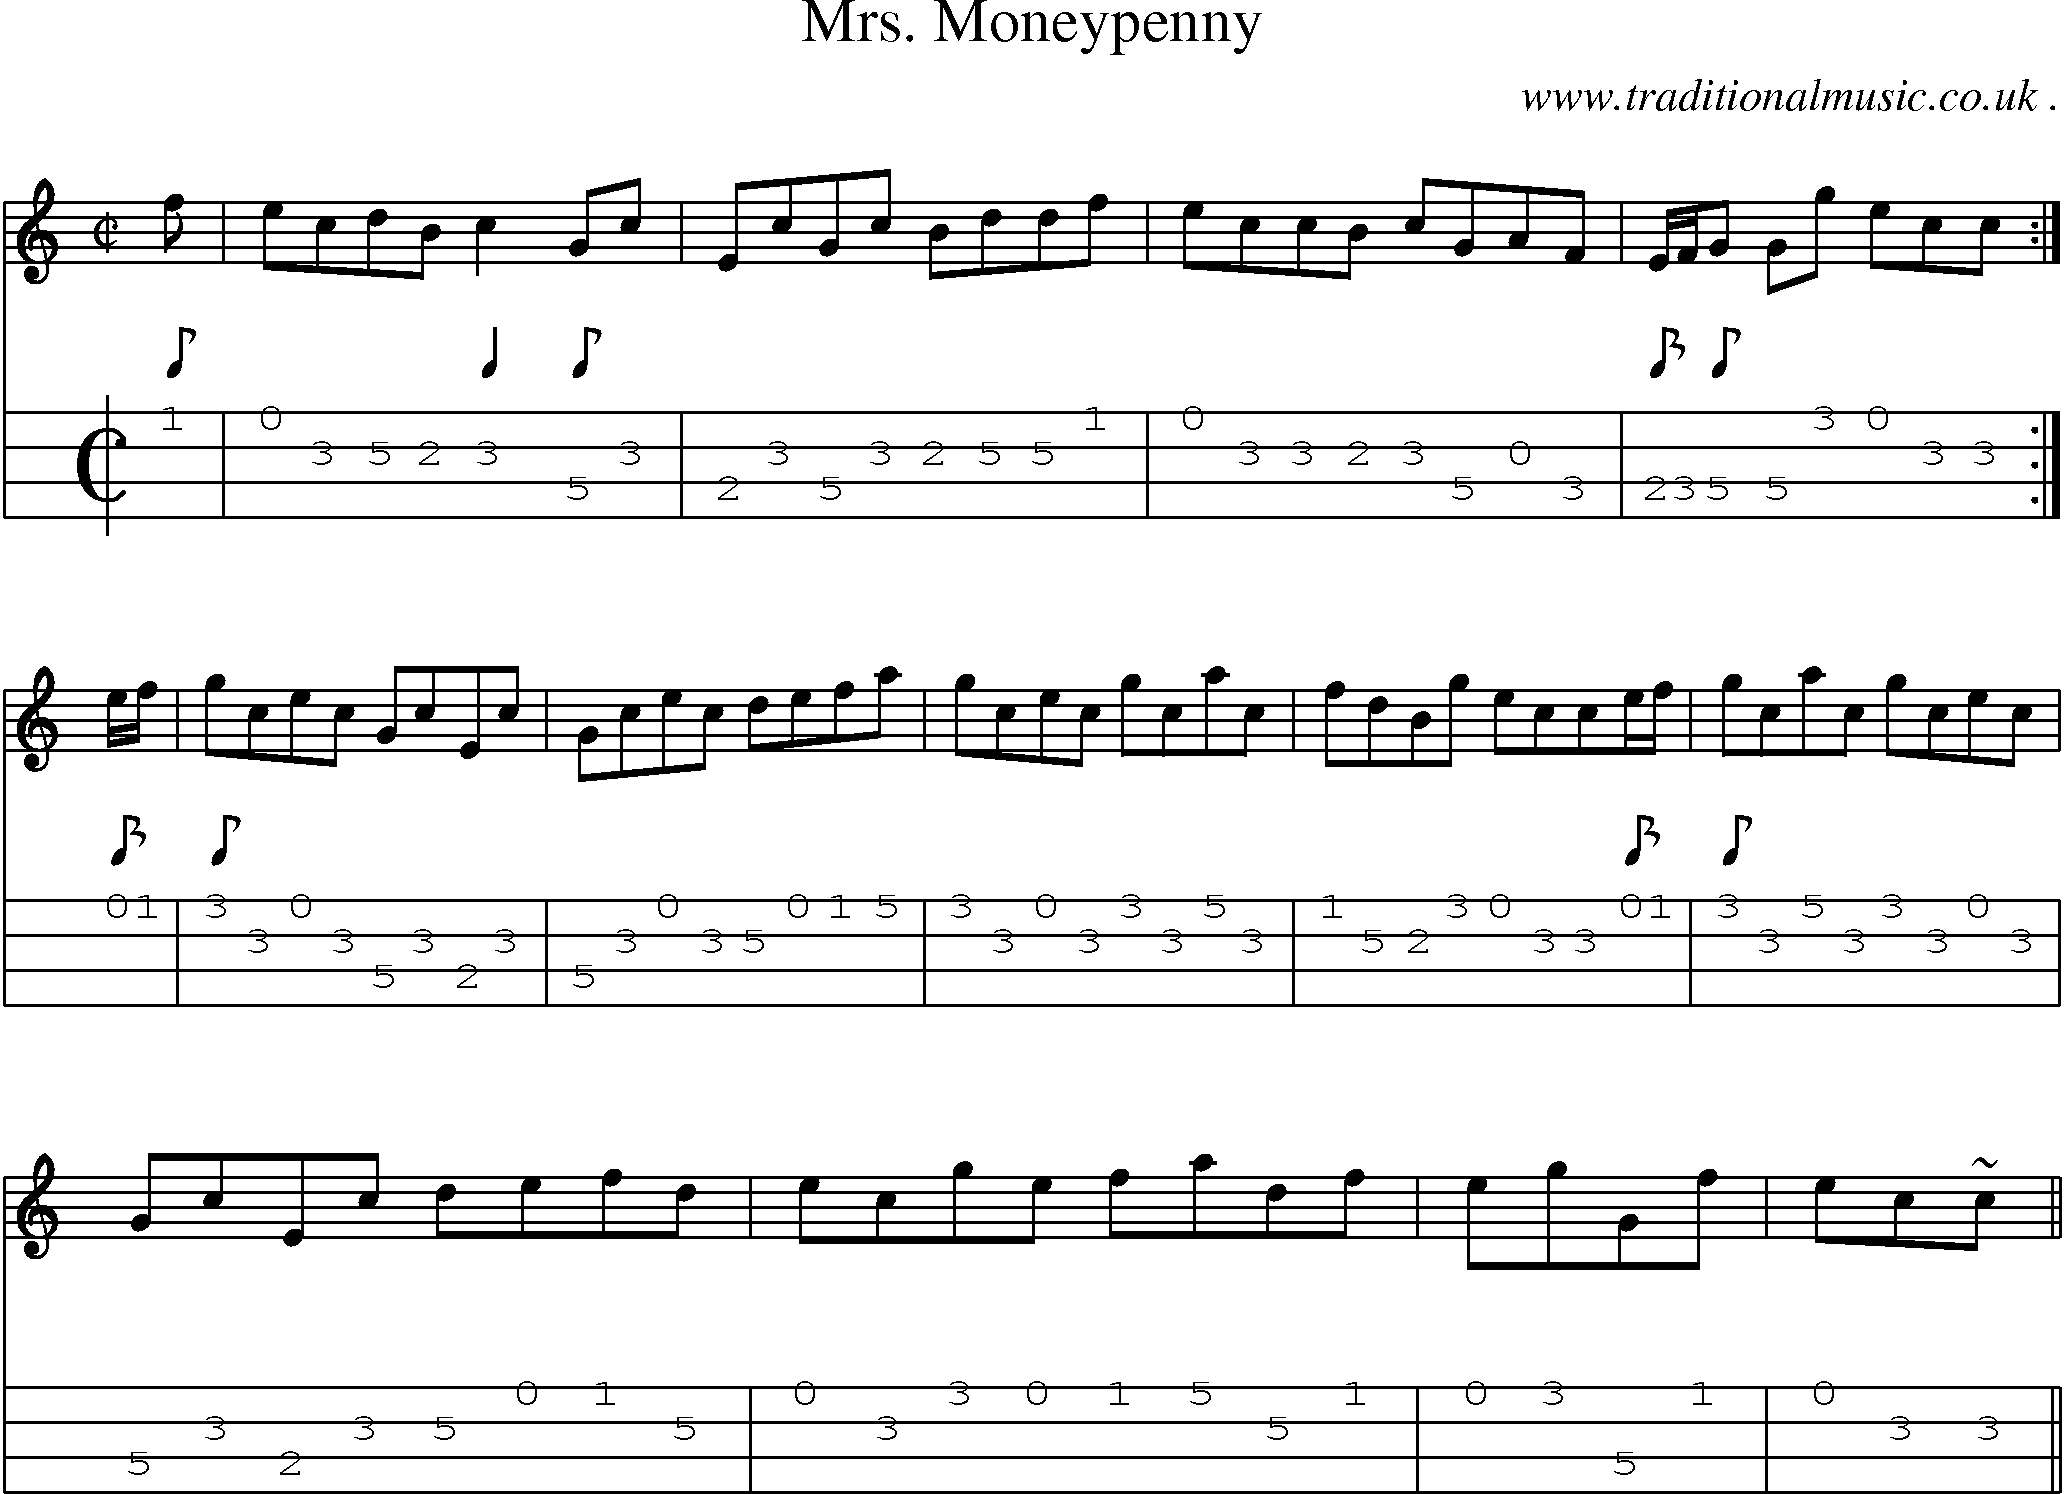 Sheet-music  score, Chords and Mandolin Tabs for Mrs Moneypenny